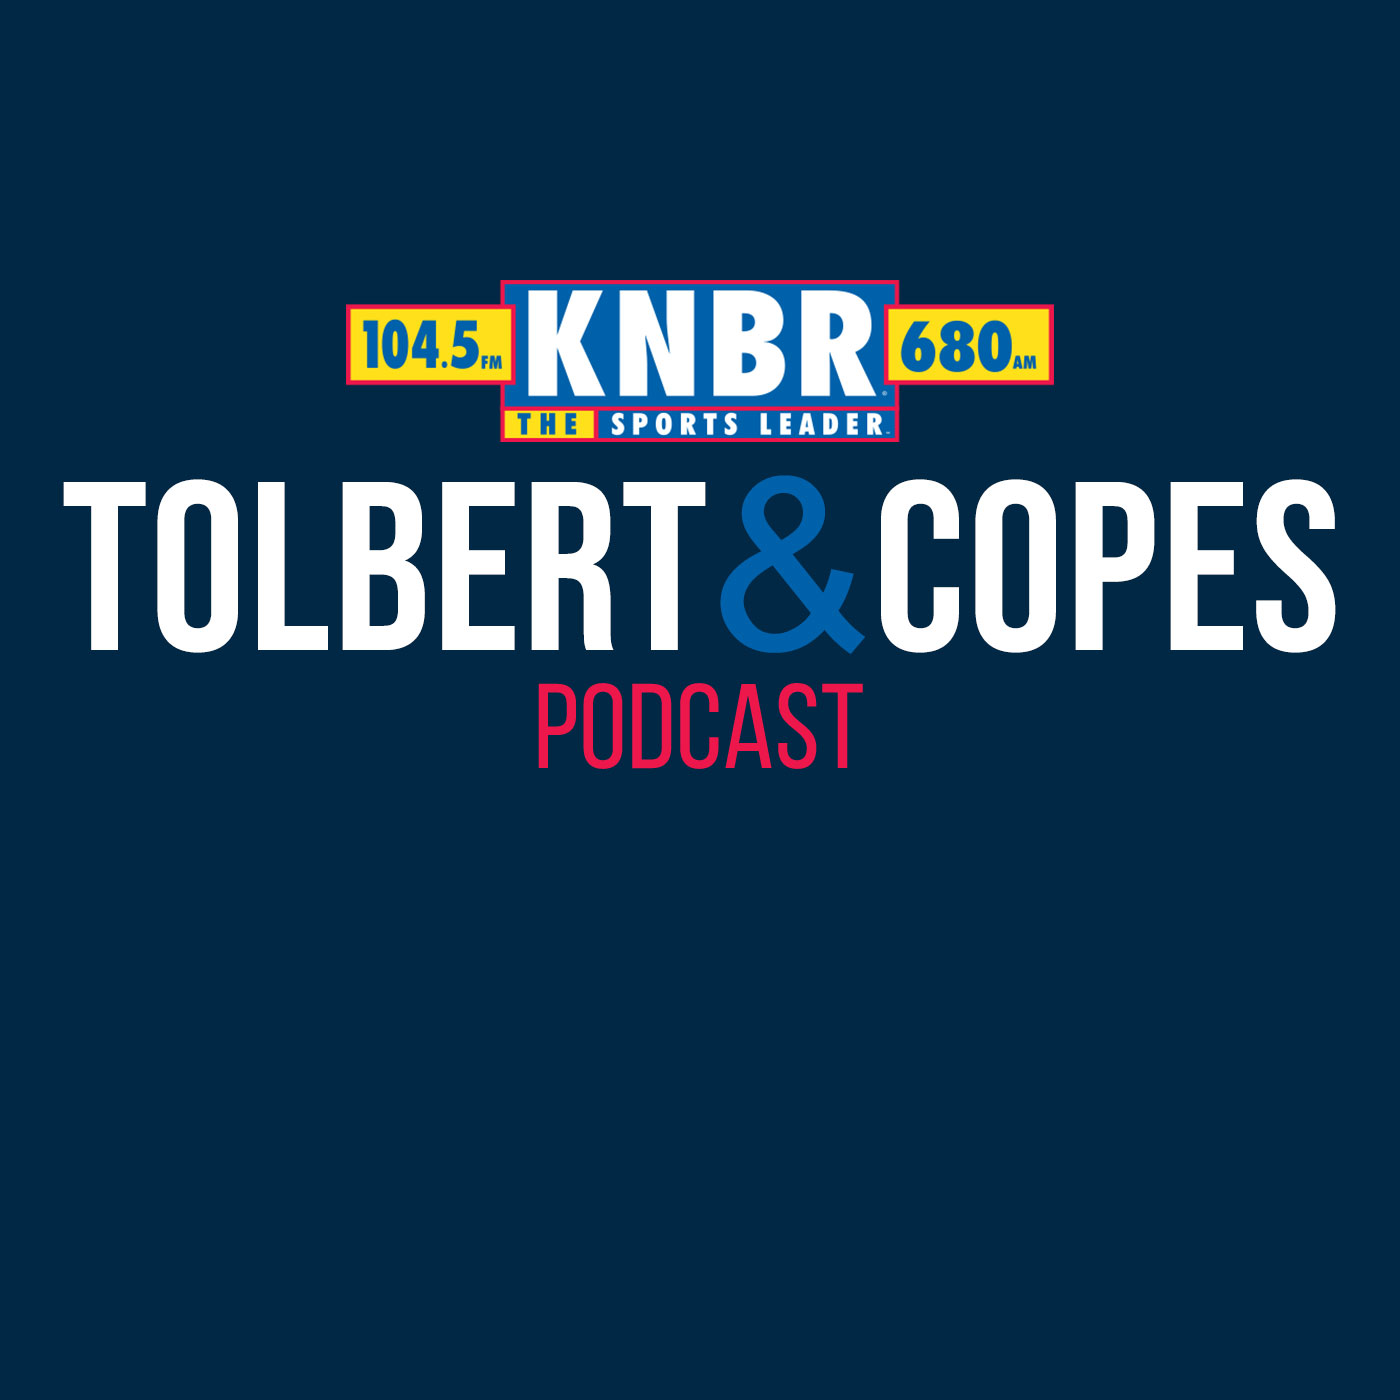 6-26 Tolbert & Copes Hour 1: Warriors are Going "Big Fish Hunting" for Paul George